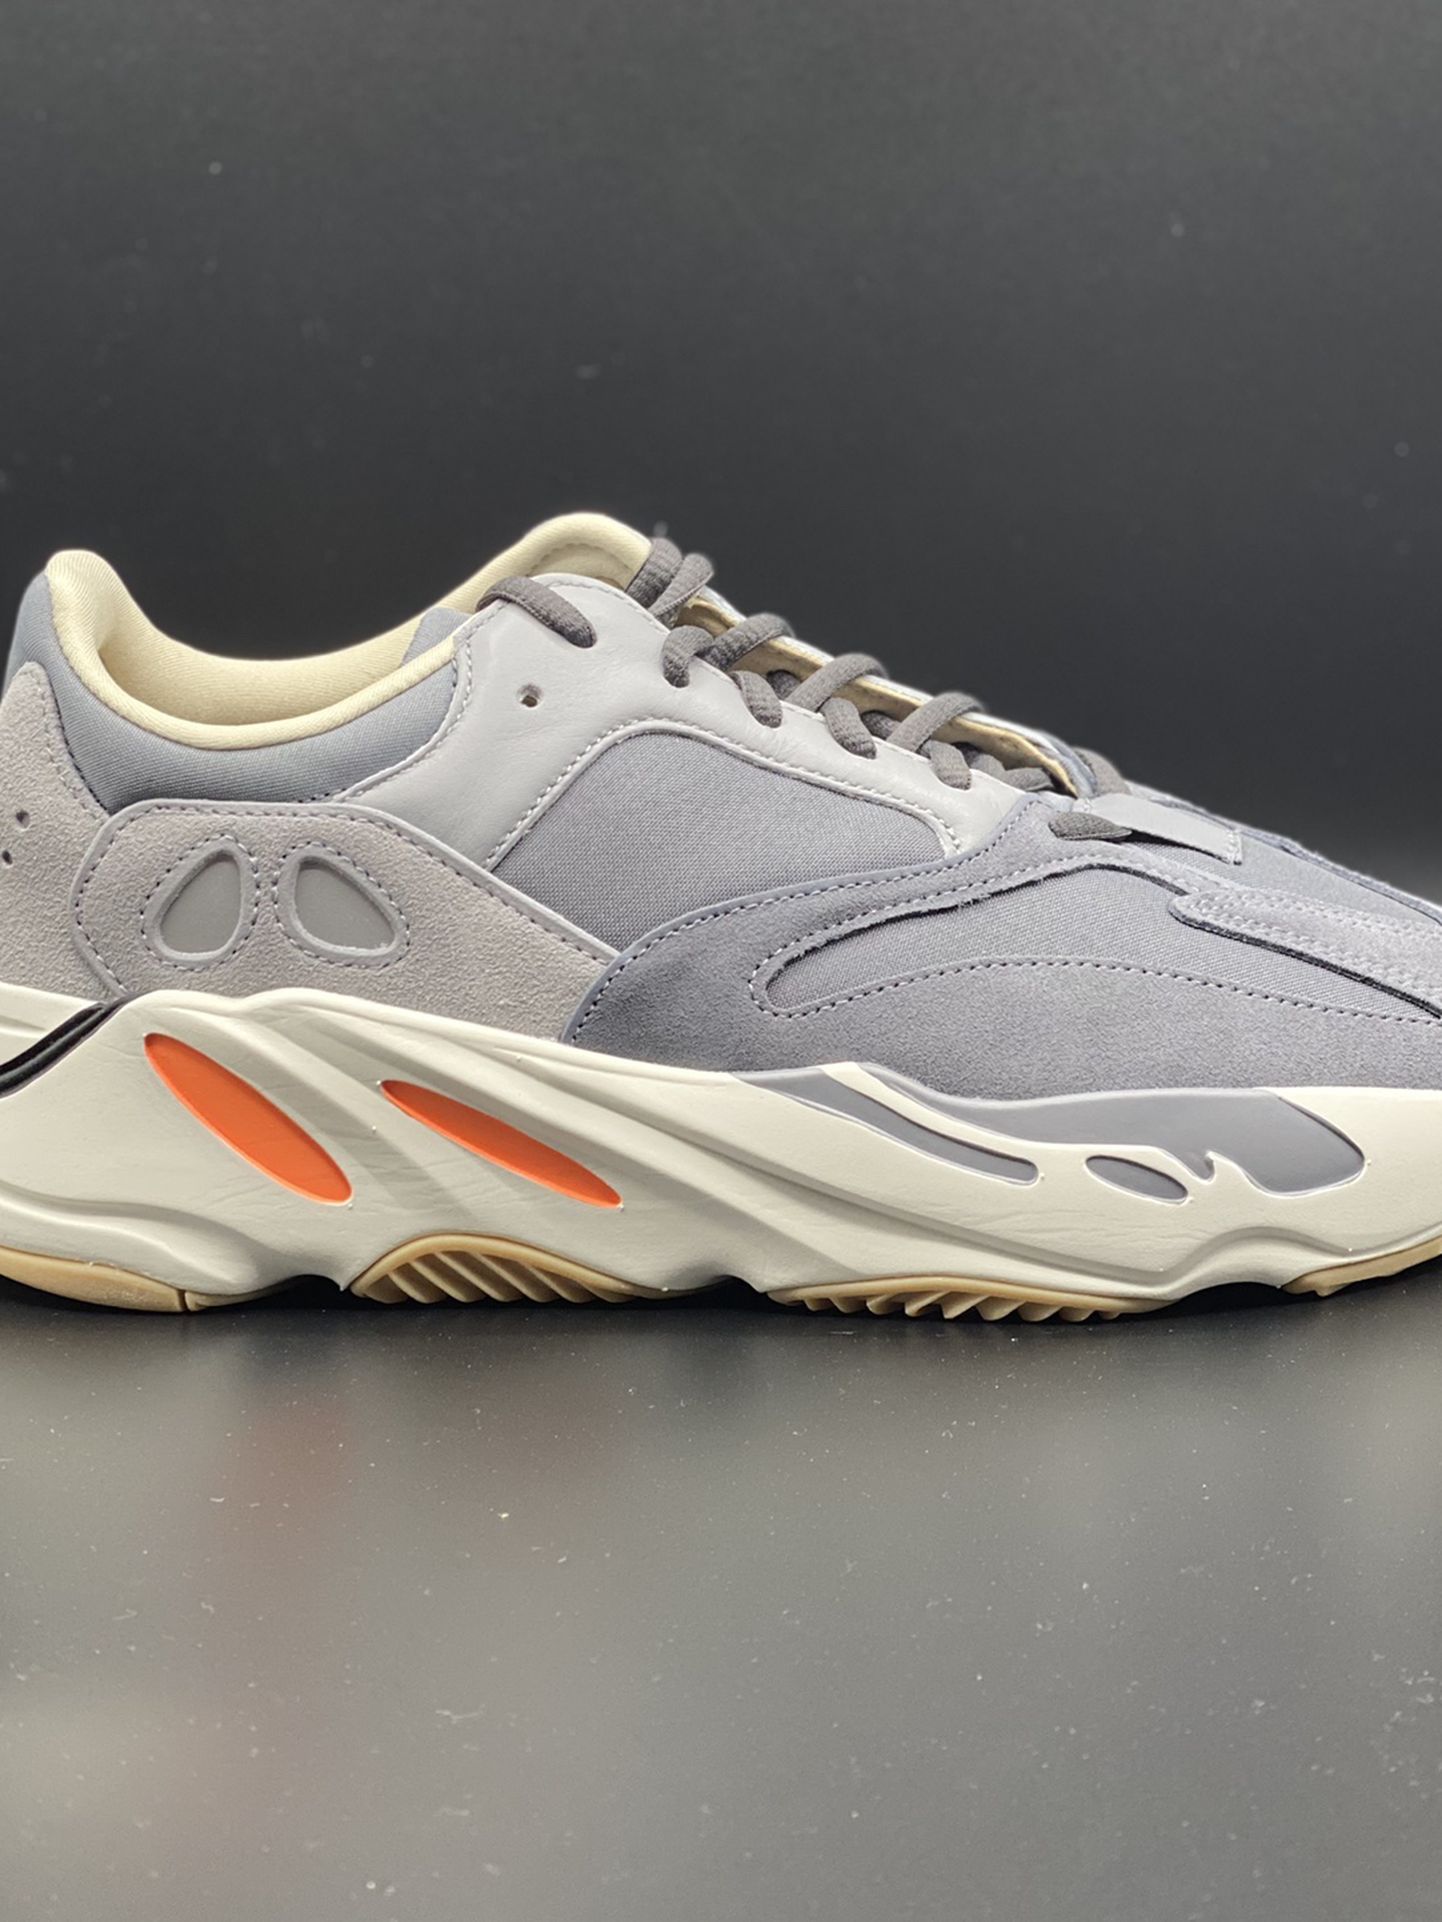 Adidas Yeezy 700 “Magnet” Size 11 DS